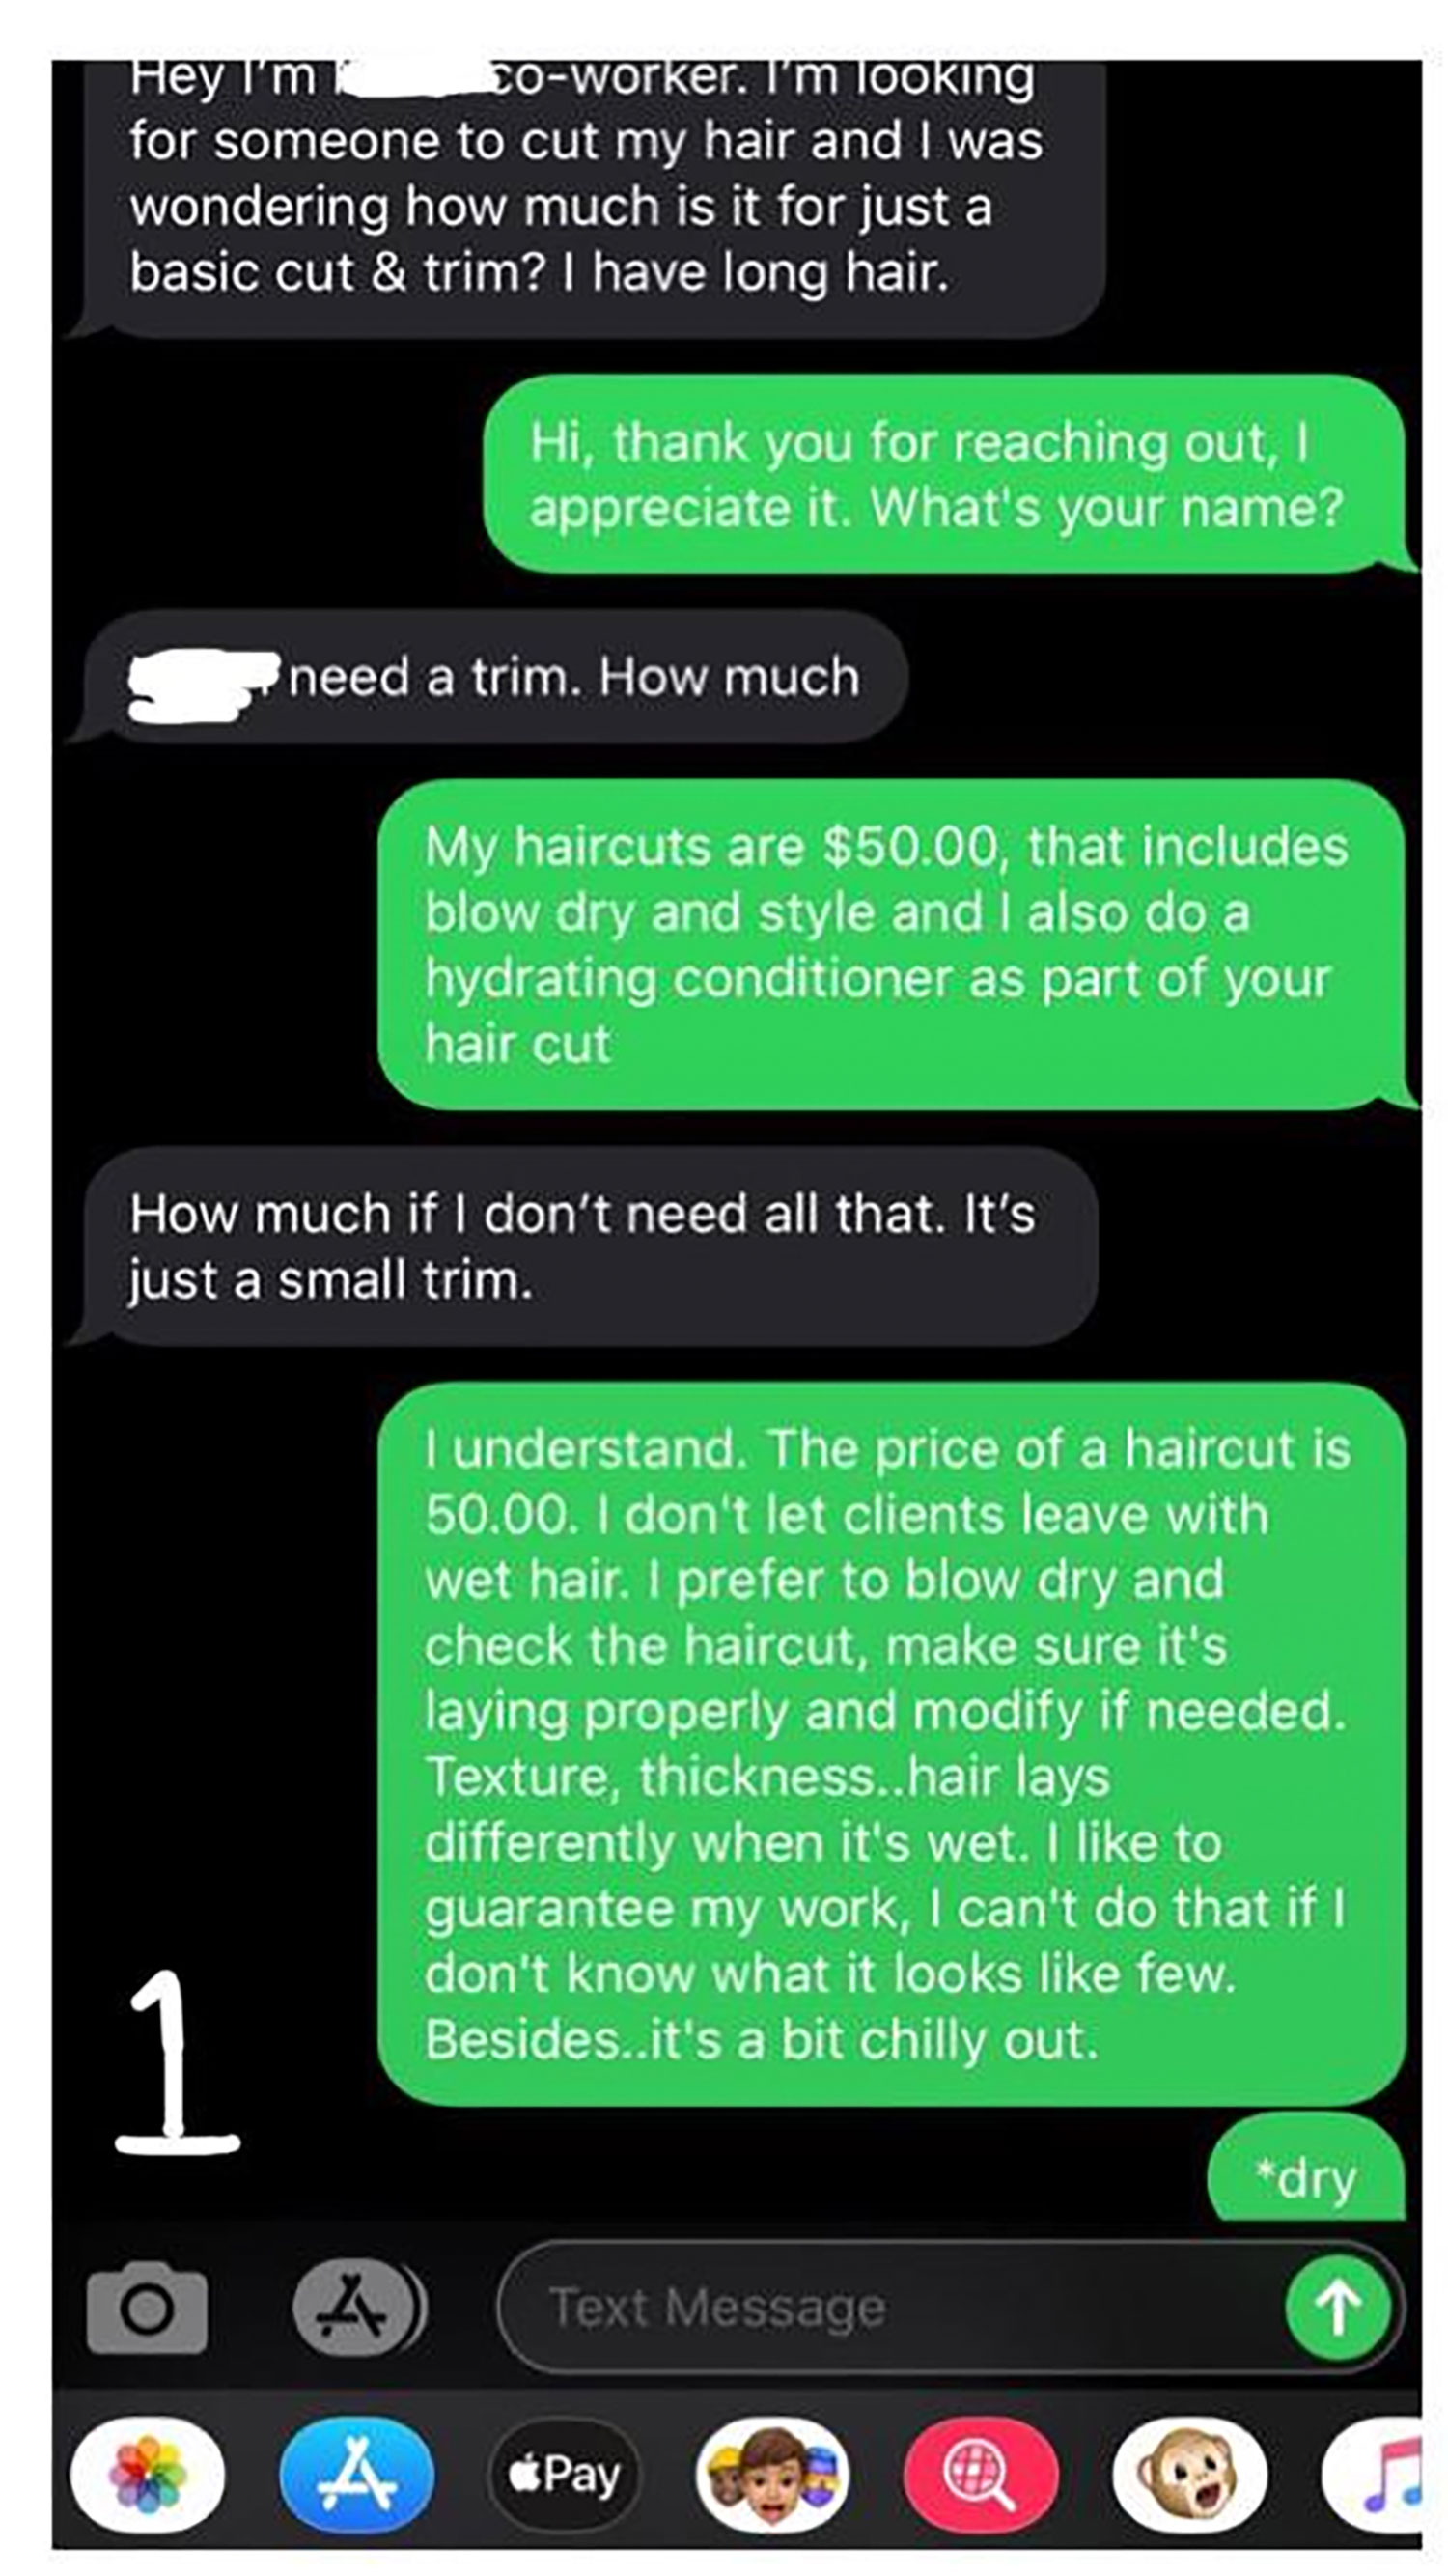 software - Hey I' m 0worker. I'm looking for someone to cut my hair and I was wondering how much is it for just a basic cut & trim? I have long hair. Hi, thank you for reaching out, appreciate it. What's your name? need a trim. How much My haircuts are $5